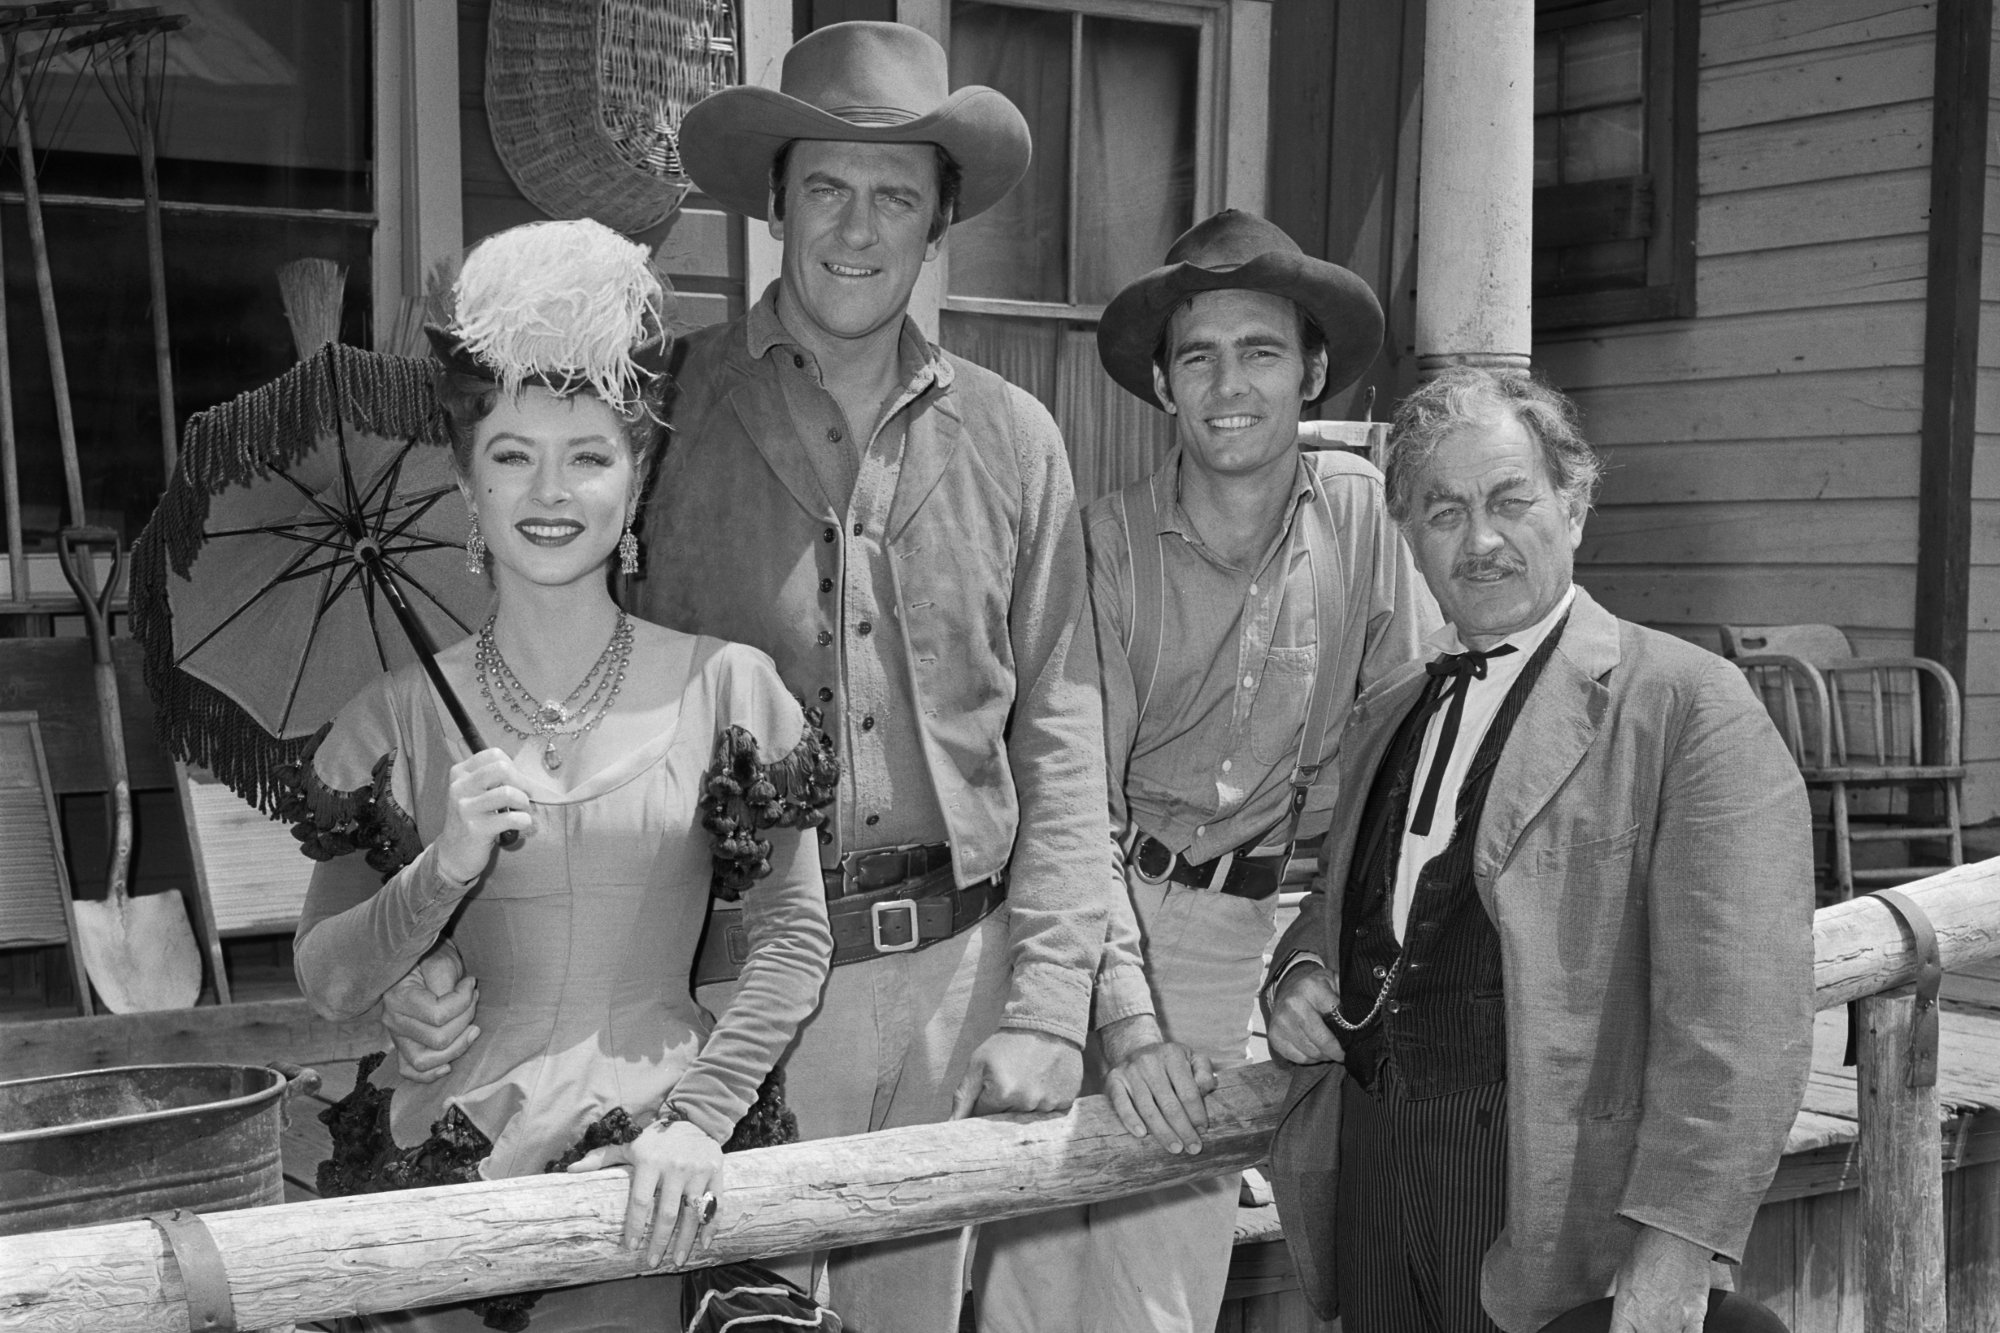 'Gunsmoke' Amanda Blake as Kitty Russell, James Arness as Marshal Matt Dillon, Dennis Weaver as Chester Goode and Milburn Stone as Dr. Galen 'Doc' Adams in best episodes. They're standing behind wooden fence, smiling.